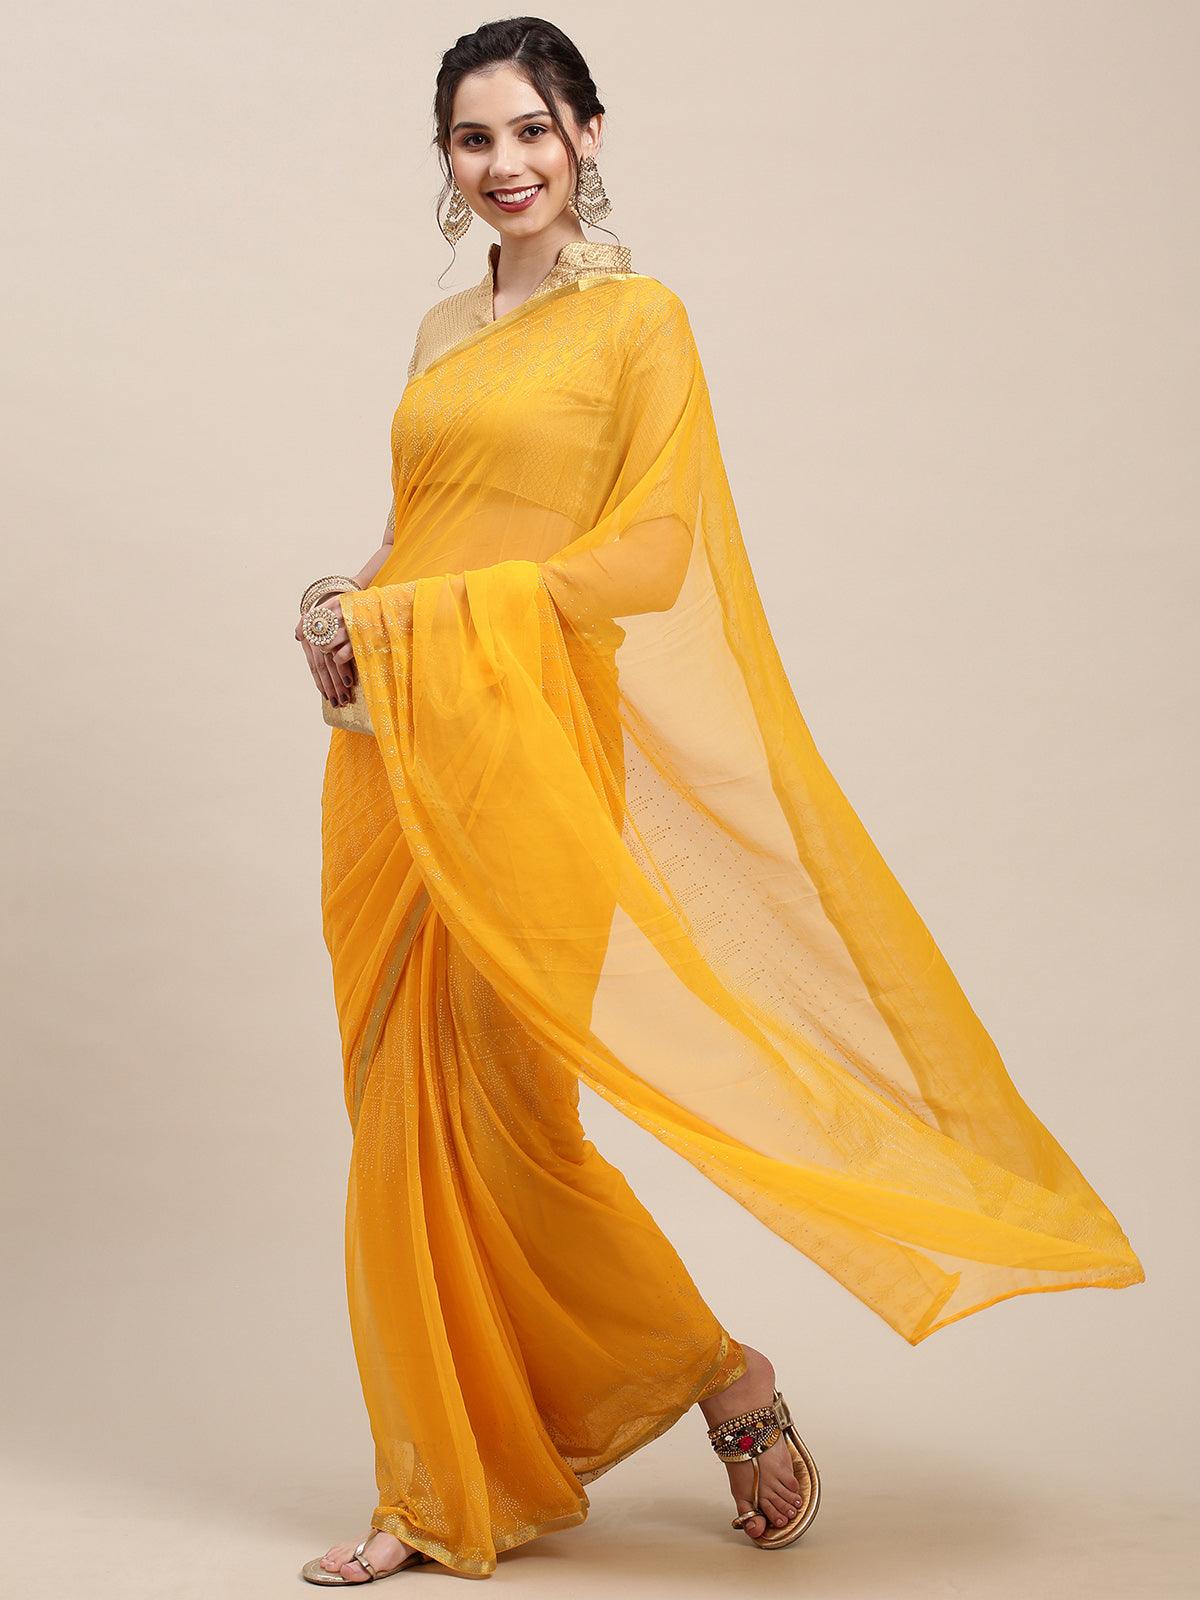 Women's Yellow Chiffon Woven Border Saree With Unstitched Blouse - Odette